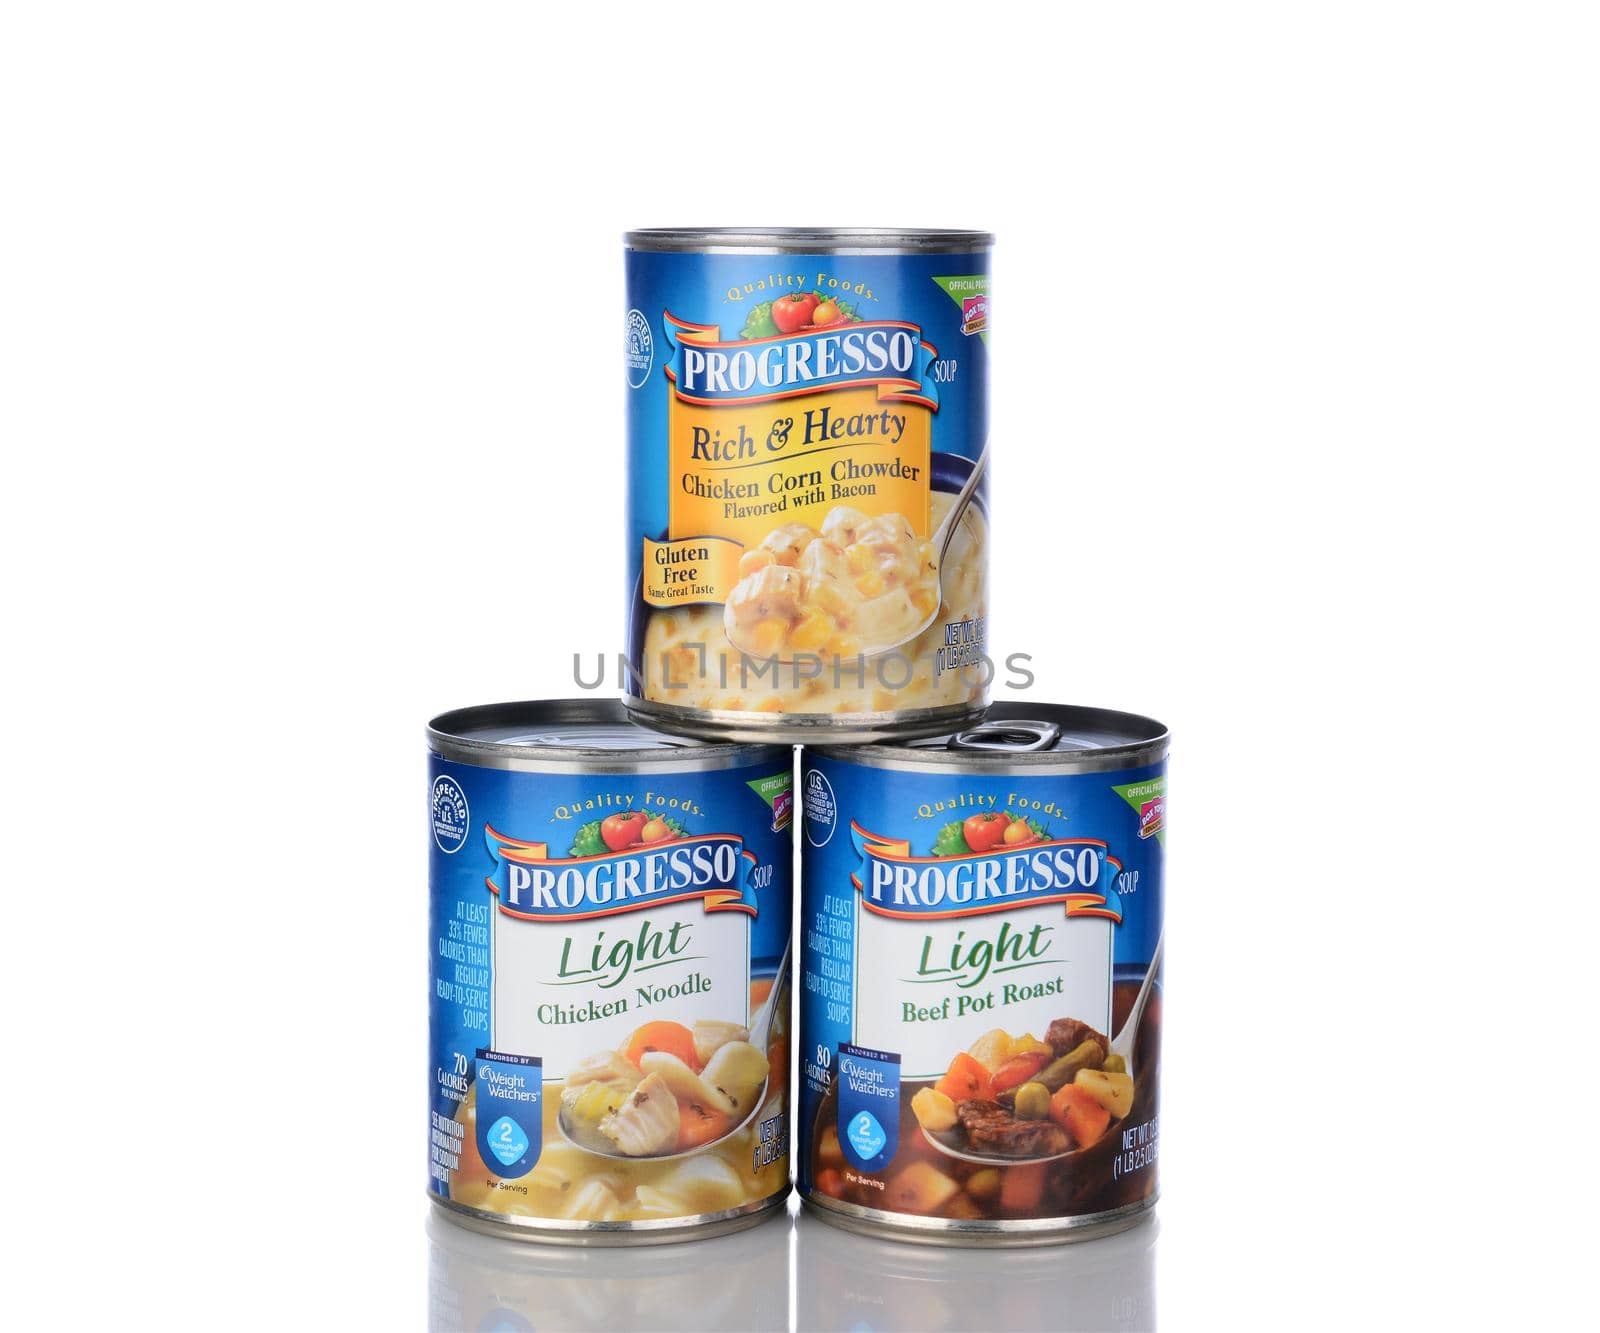 IRVINE, CA - January 05, 2014: Three cans of Progresso Soups. Soups include Light Chicken Noodle, Light Beef Pot Roast and Rich & Hearty Chicken Corn Chowder.  